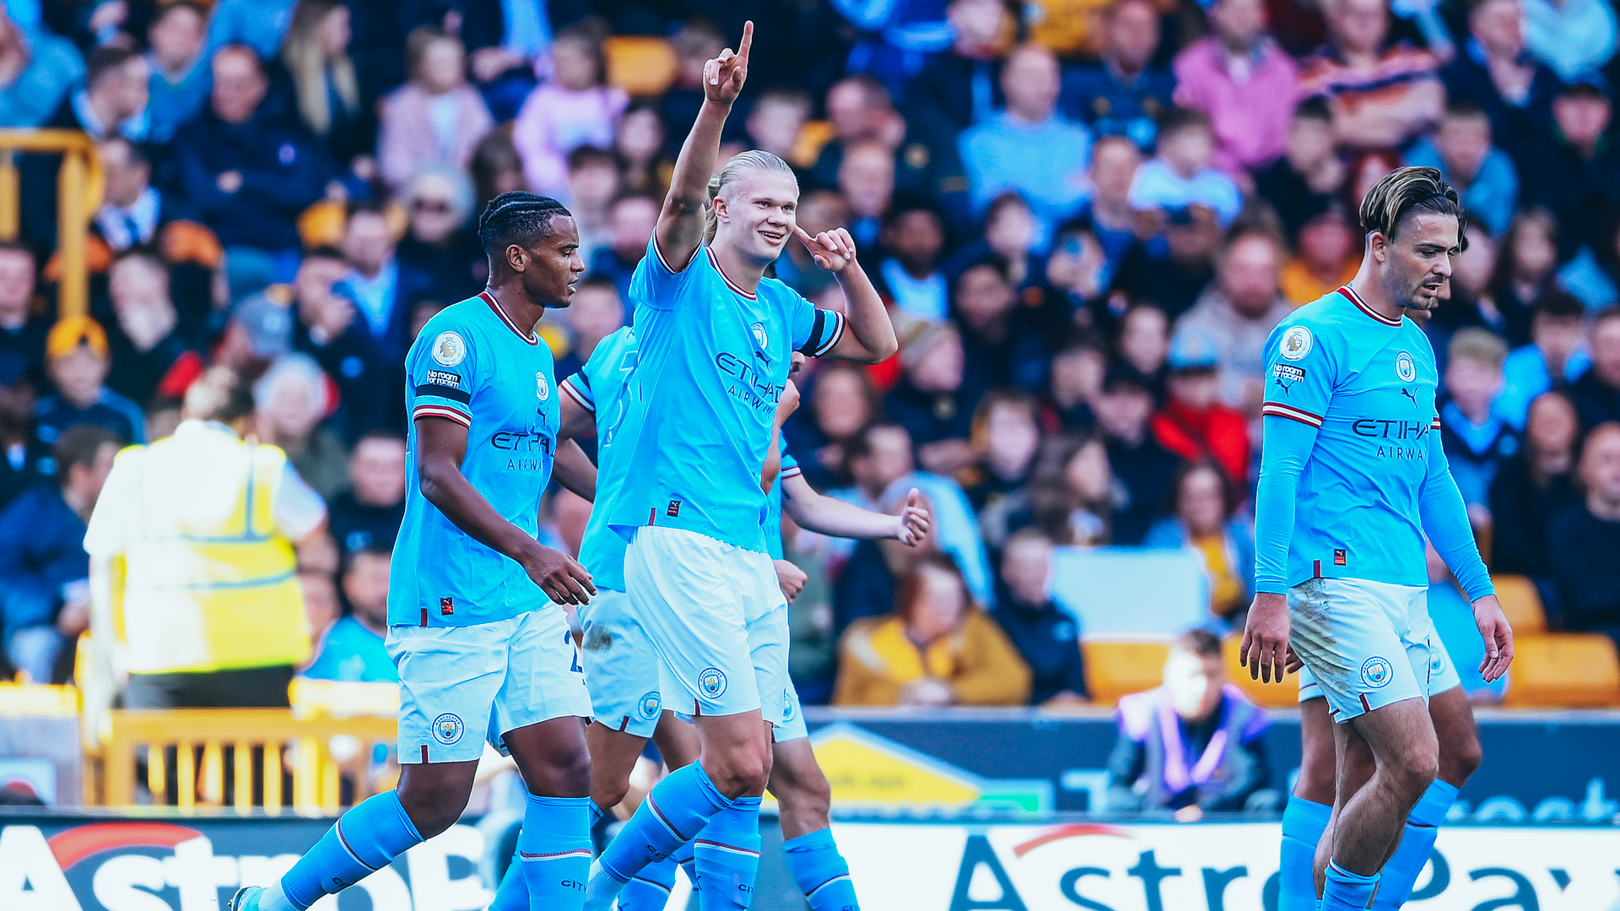 Dickov: 'Even more to come from Erling Haaland'